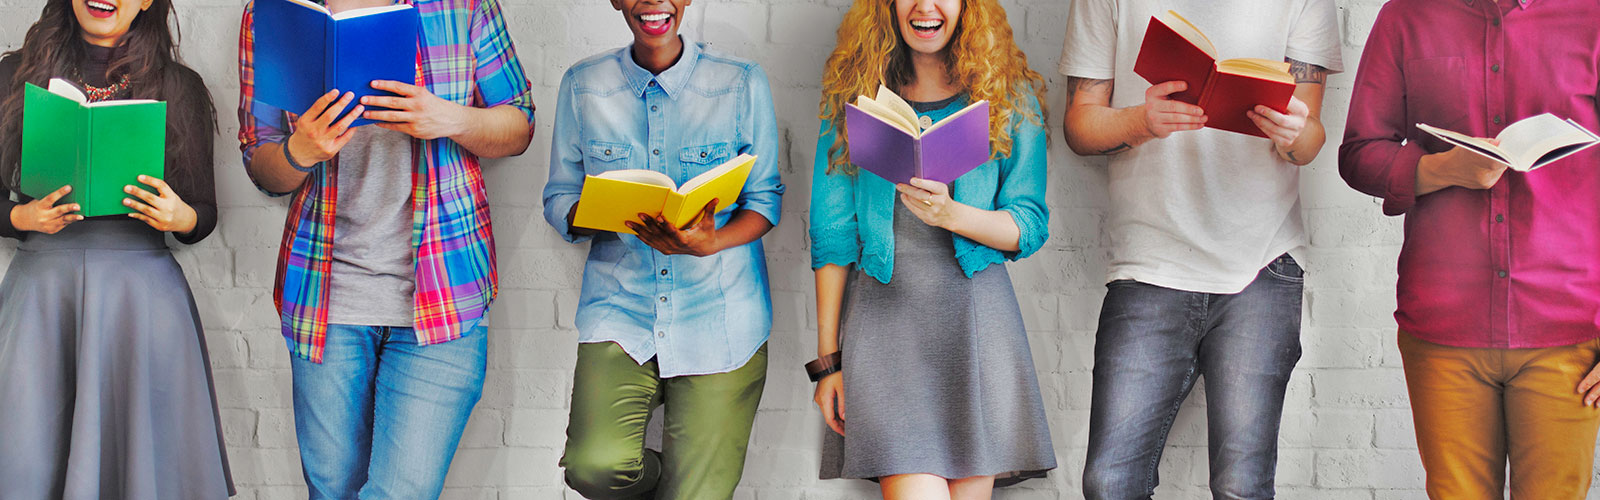 a row of young people of different ethnicities holding books and smiling while standing against a white brick wall.